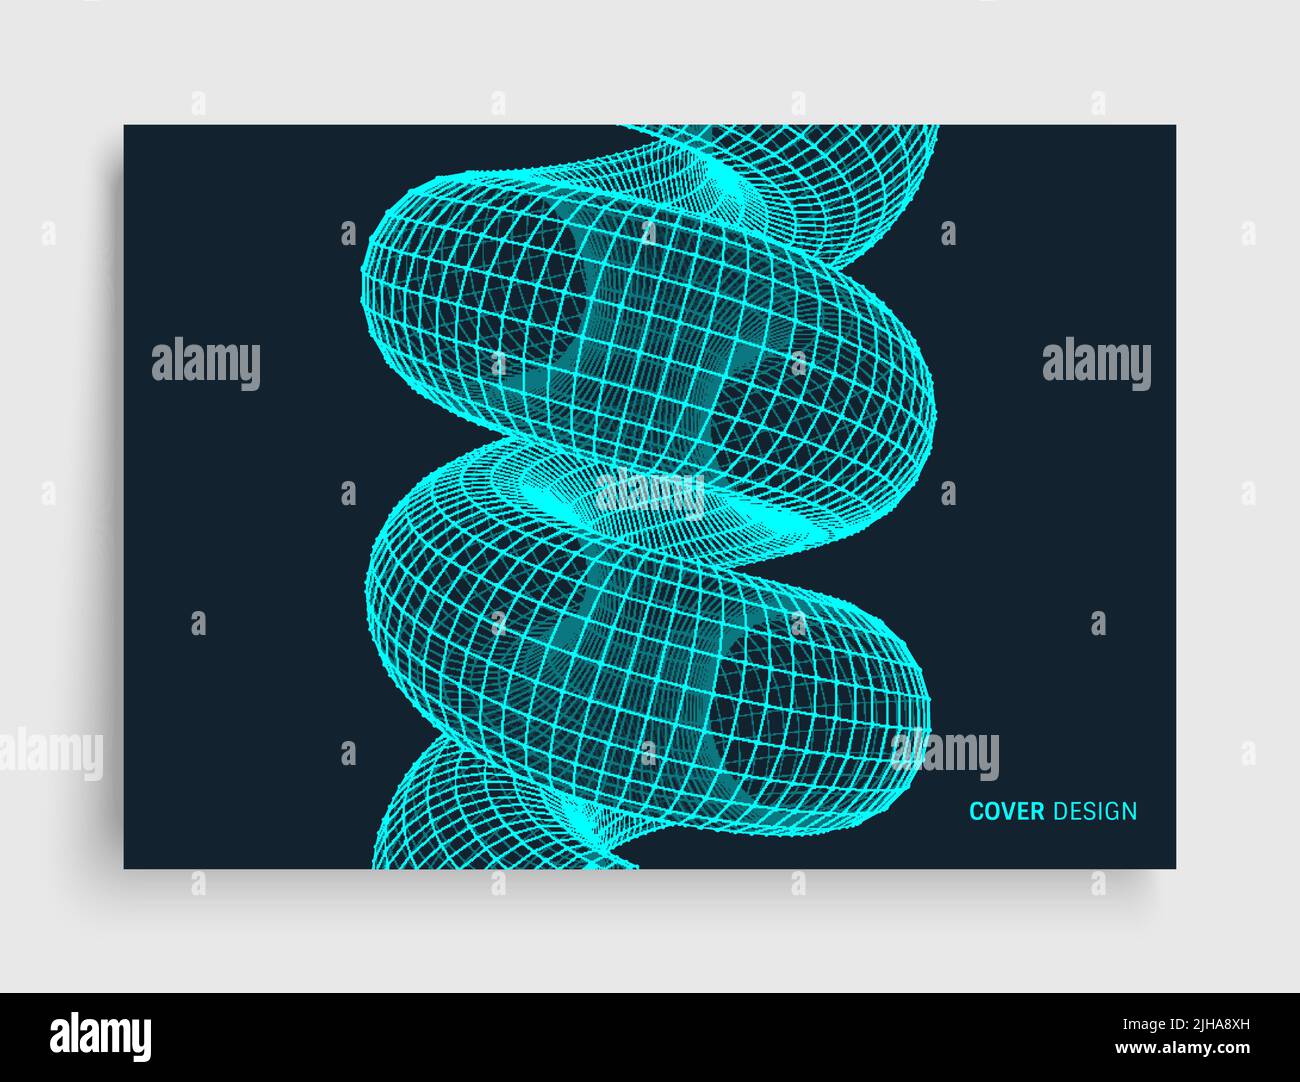 Cover design template. Spiral. Connection Structure. Abstract grid design. 3d vector illustration for science, technology. Stock Vector